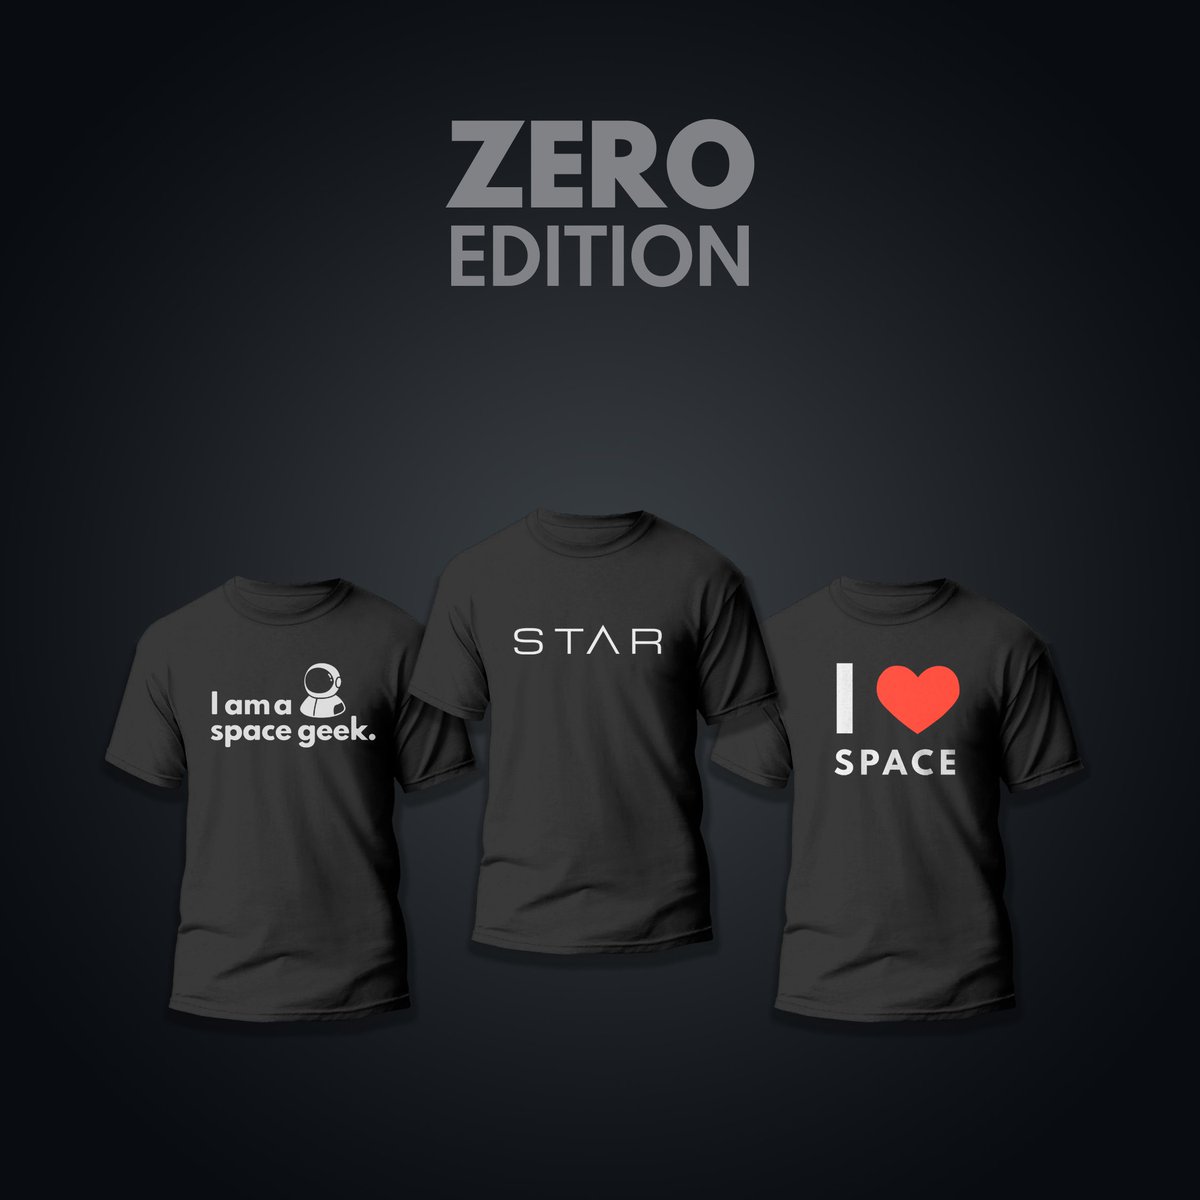 Introducing the ZERO Edition of STAR Merchandise From Stardust to a Jersey in your wardrobe, the journey was beautiful ❤️ To order your jersey, register here - bit.ly/merch-STAR Limited Edition of 300